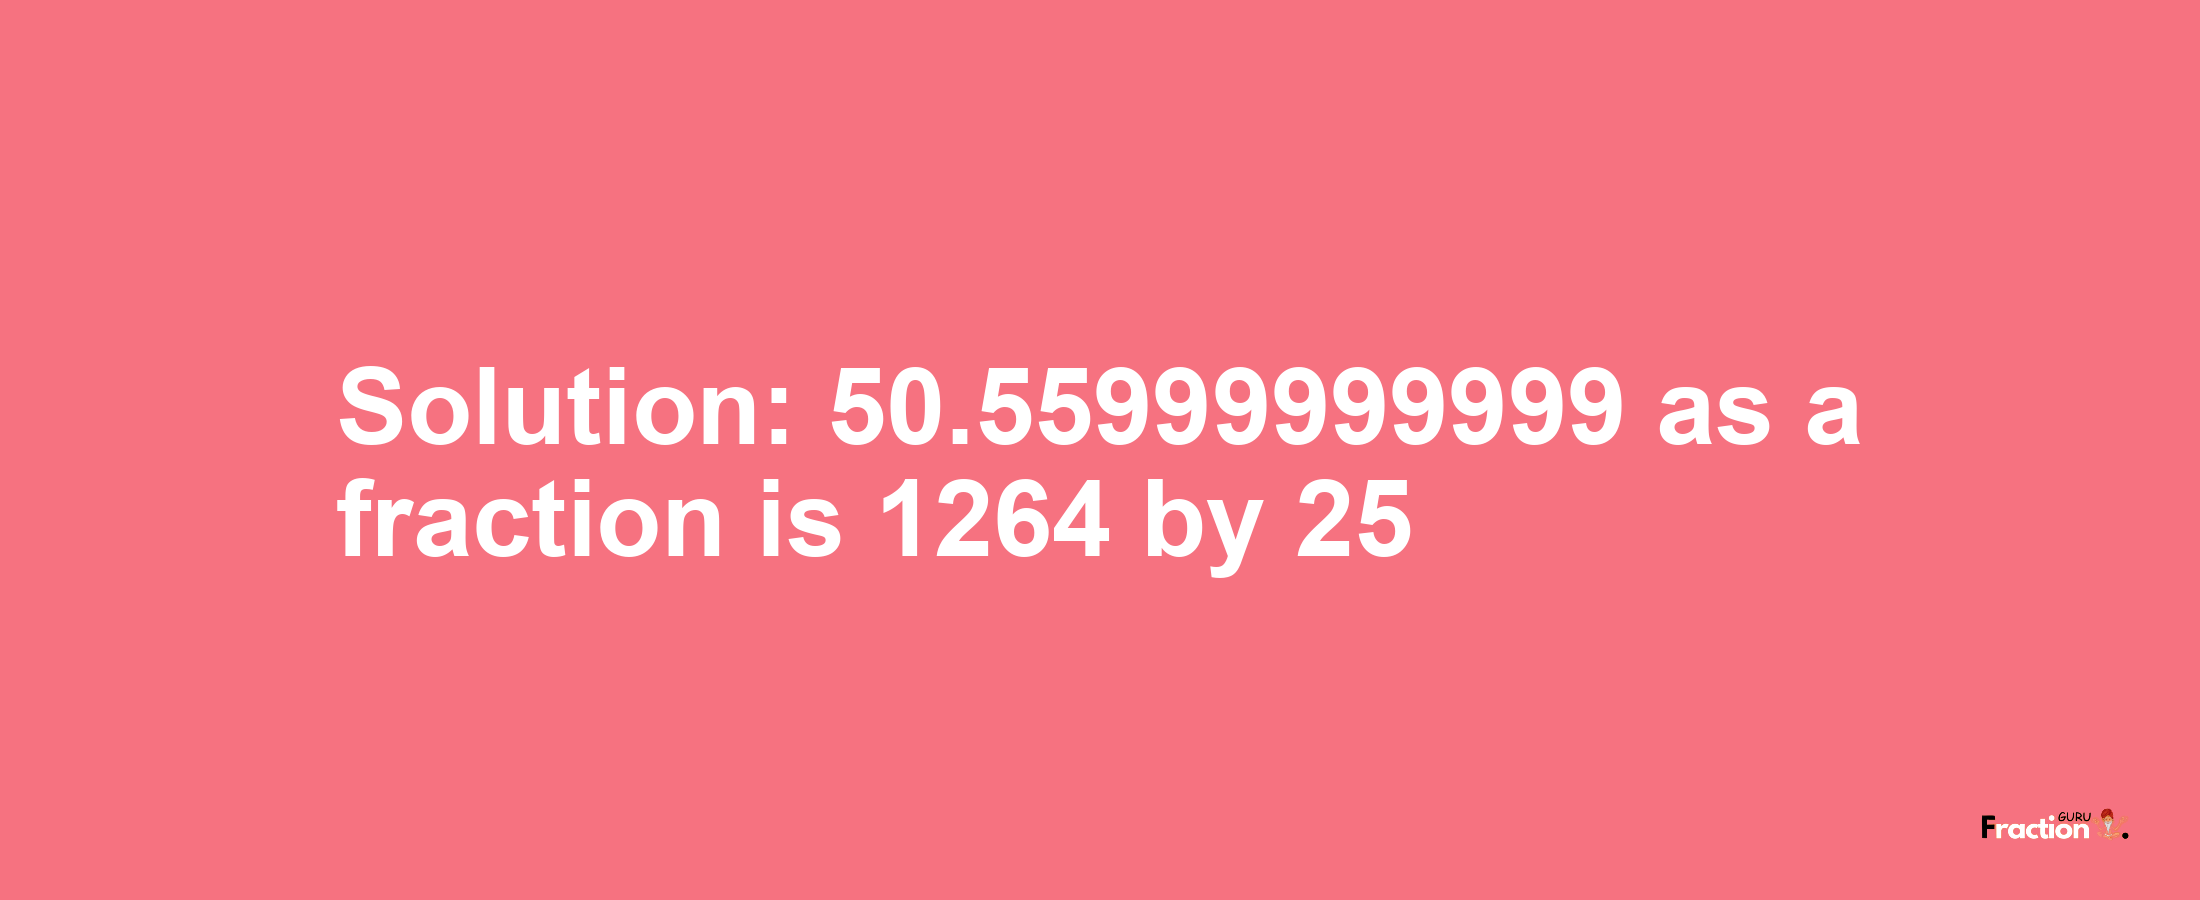 Solution:50.55999999999 as a fraction is 1264/25